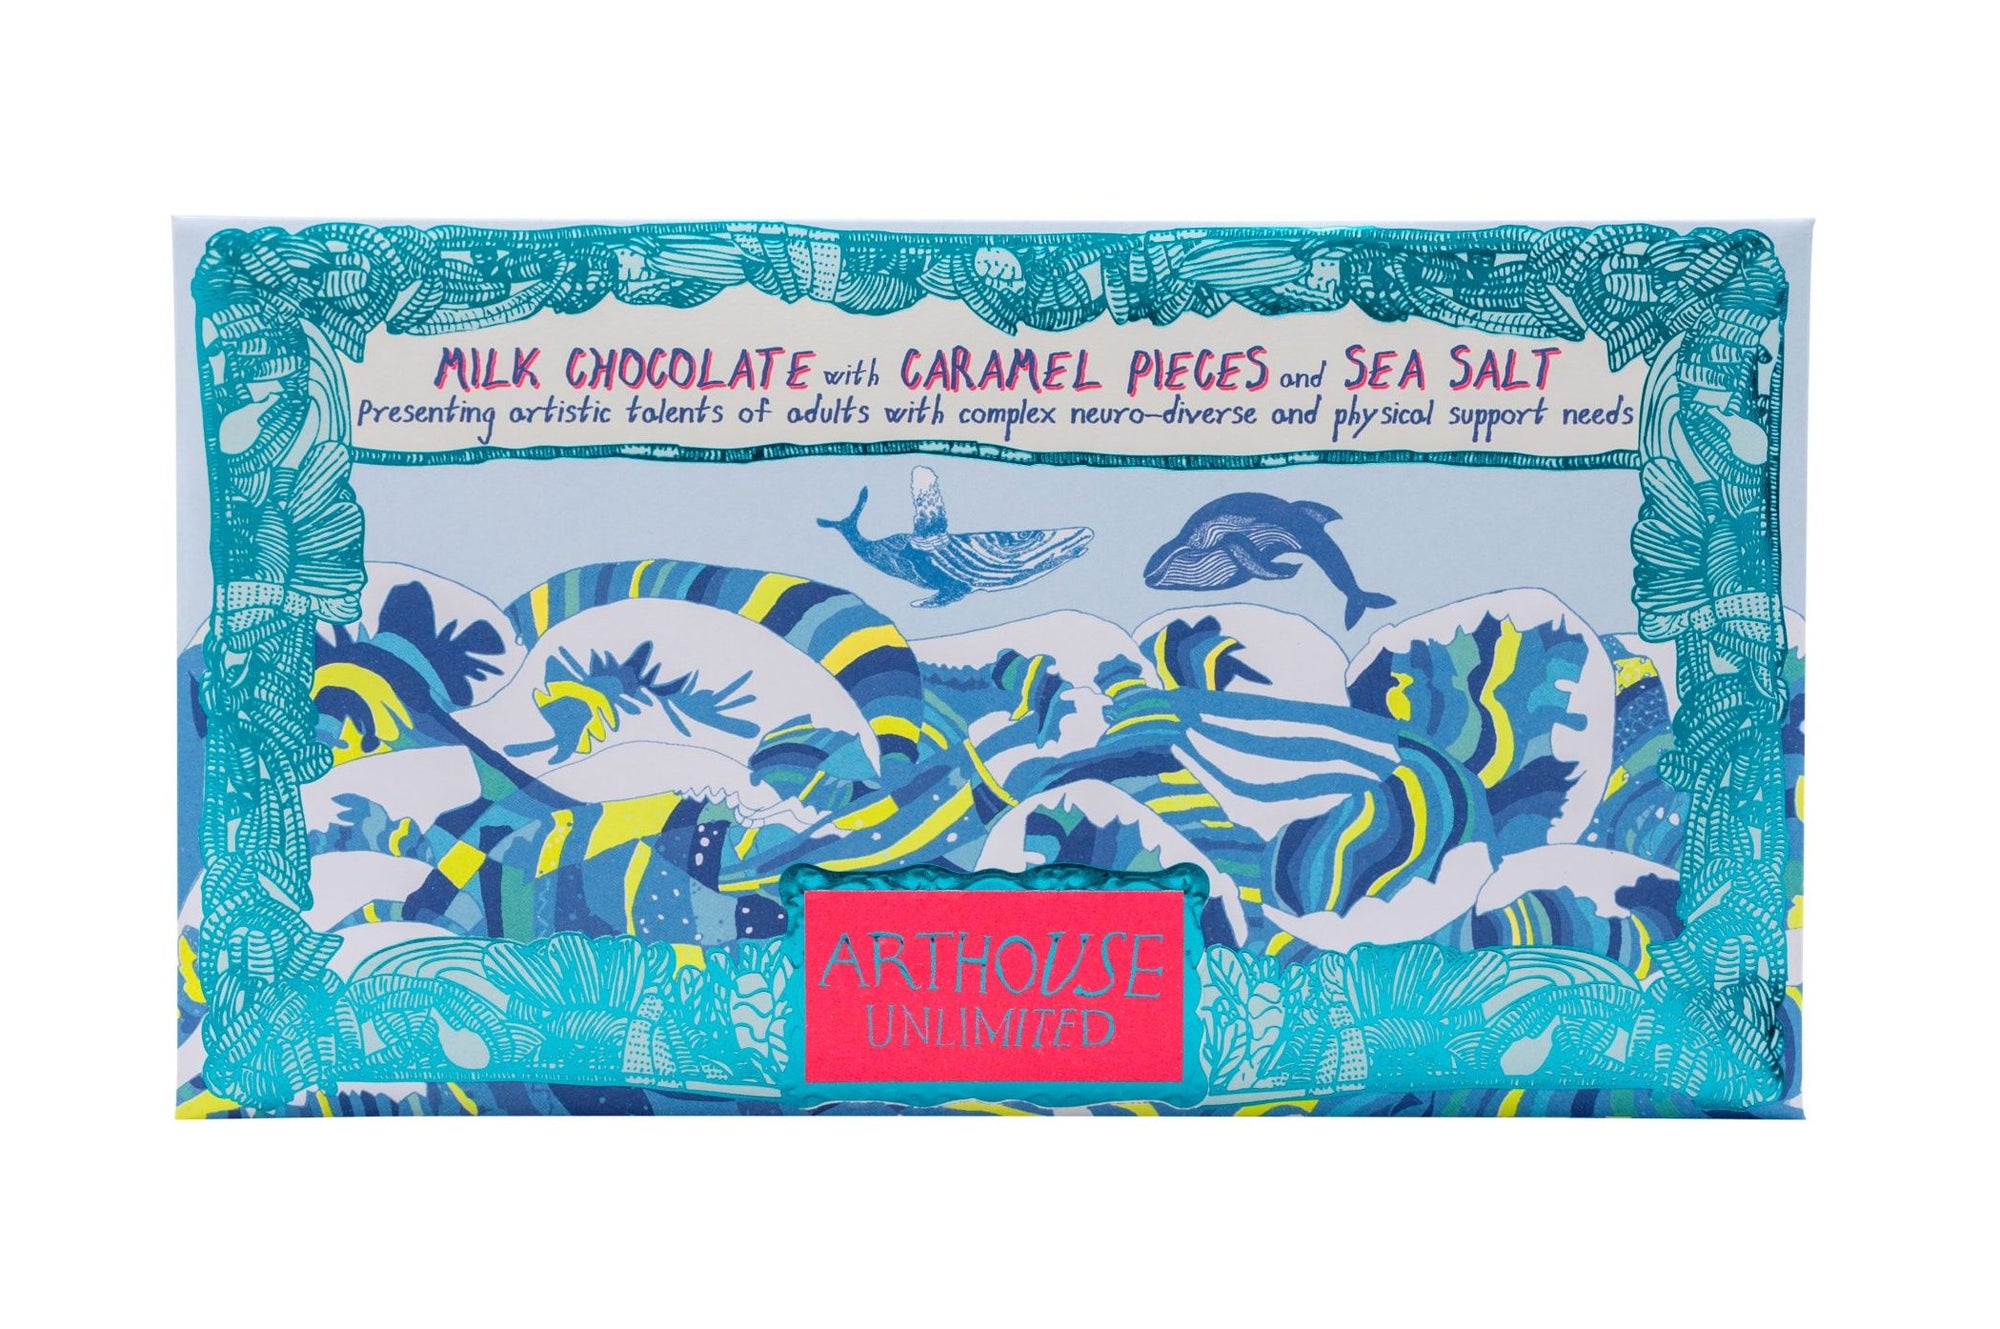 Swim with Whales Chocolate Bar - Milk Chocolate with Caramel and Sea Salt by arthouse unlimited at penny black